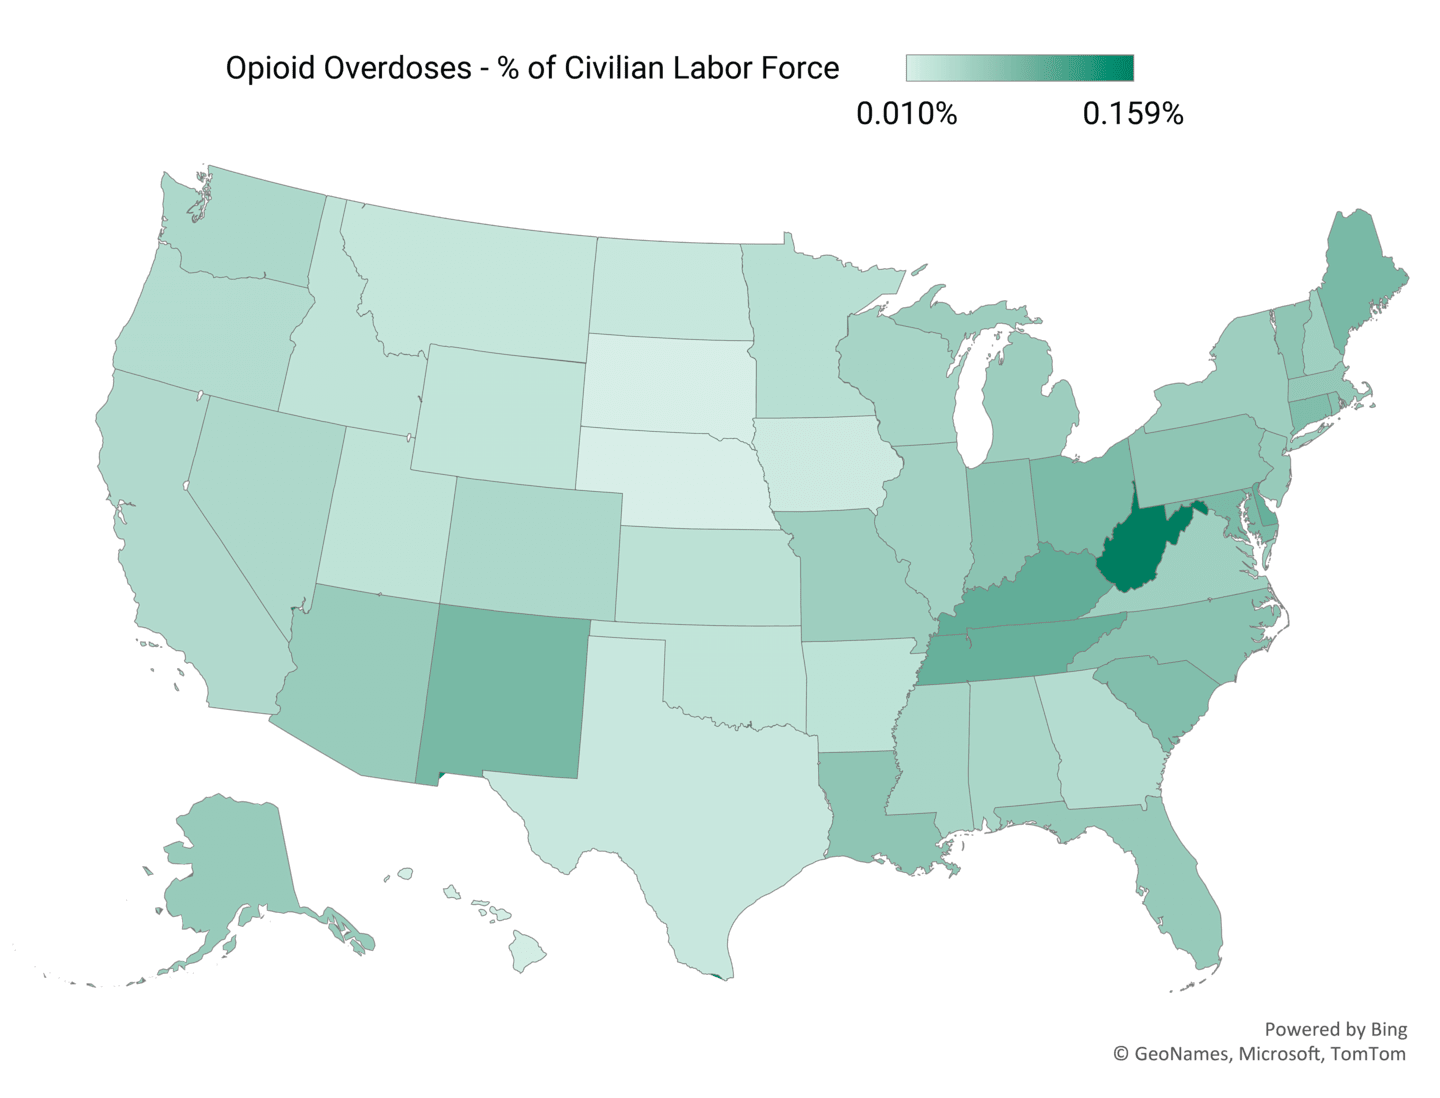 Map of the United States with each state shaded green. The darker the green, the more opioid overdoses as a percent of civilian labor force. Louisiana, Nevada, New Mexico, South Carolina and West Virginia are the highest.